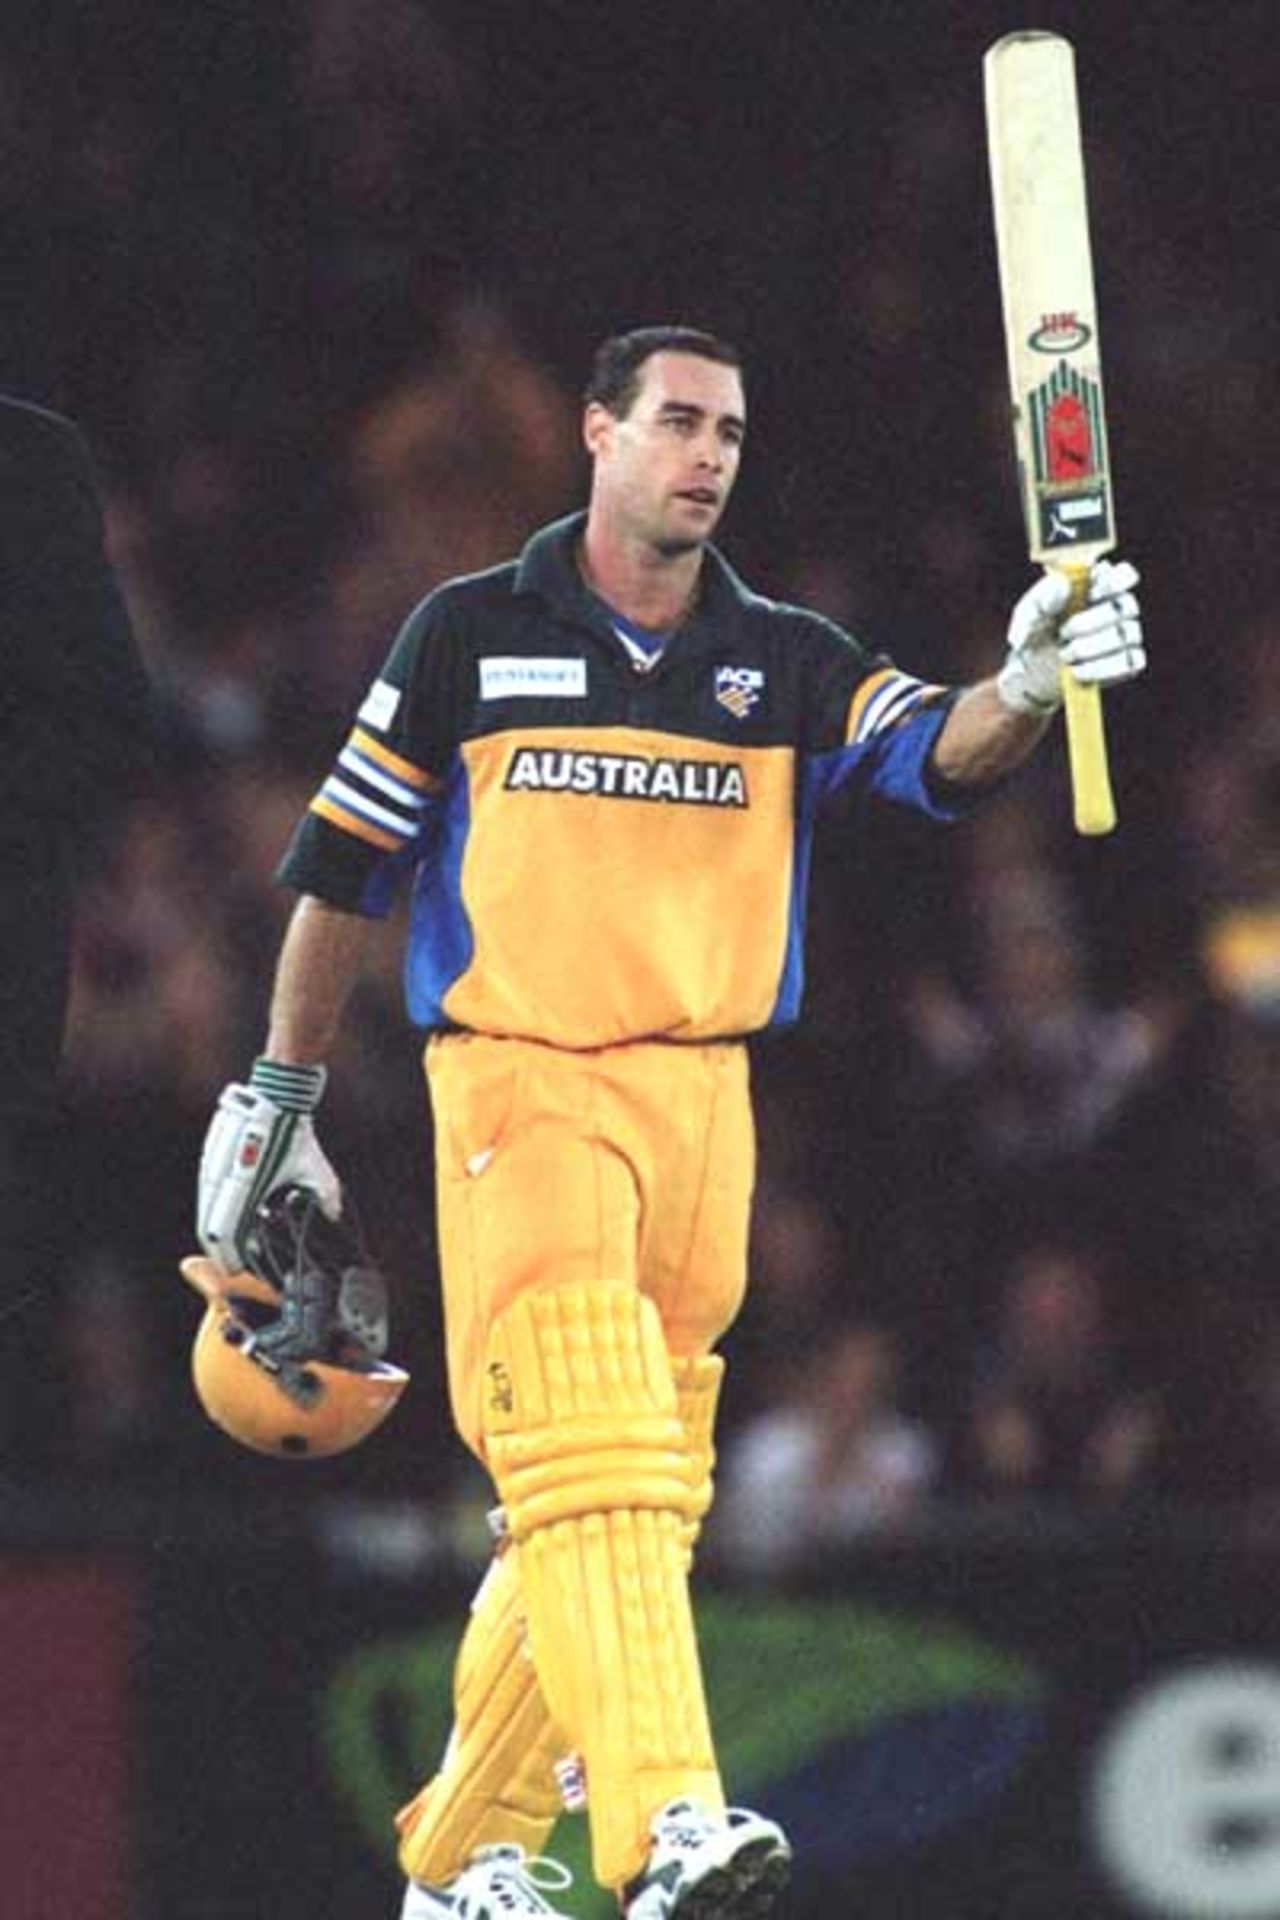 16 Aug 2000: Micheal Bevan waves to the crowd, after scoring a century, during game one of the Super Challenge 2000 between Australia and South Africa, played at Colonial Stadium in Melbourne, Australia. This is the first game of cricket to be played indoors.